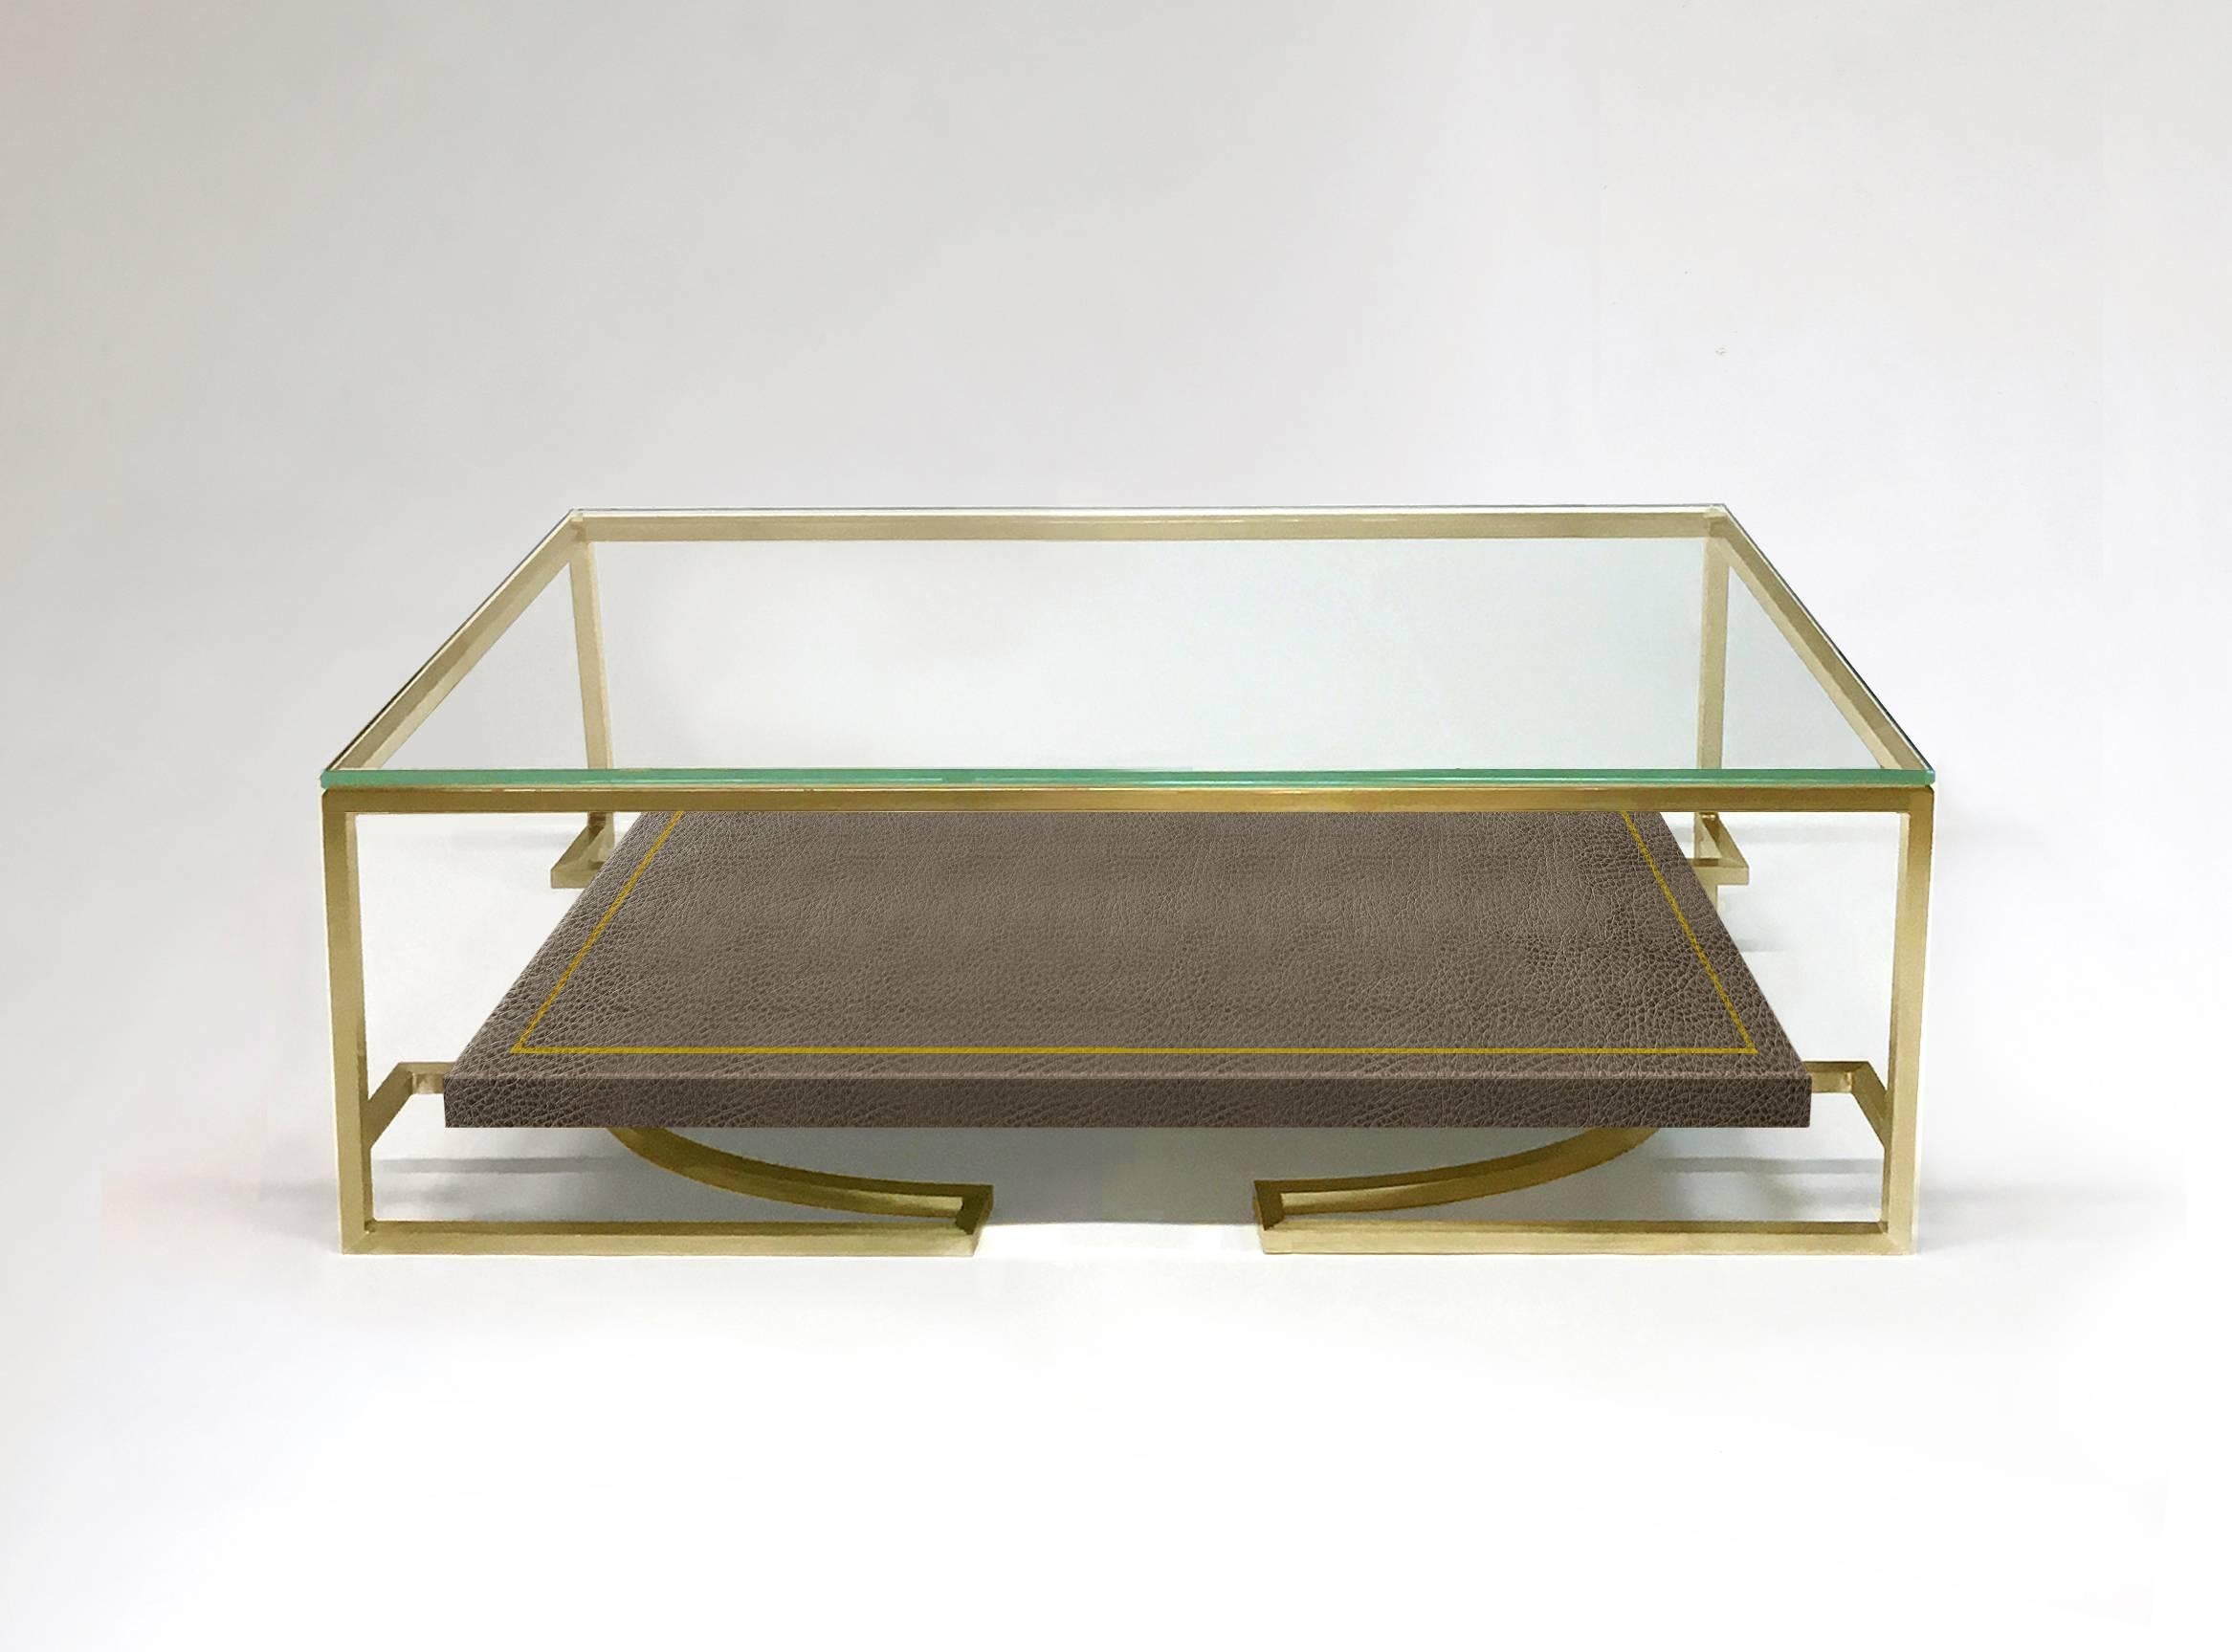 The CD coffee table is made to order and fully customizable, including metal finish, enamel color or shelf material, including wood or marble. All our products are handmade in Seattle with care by our Codor Design team. Lead time 12-14 weeks.